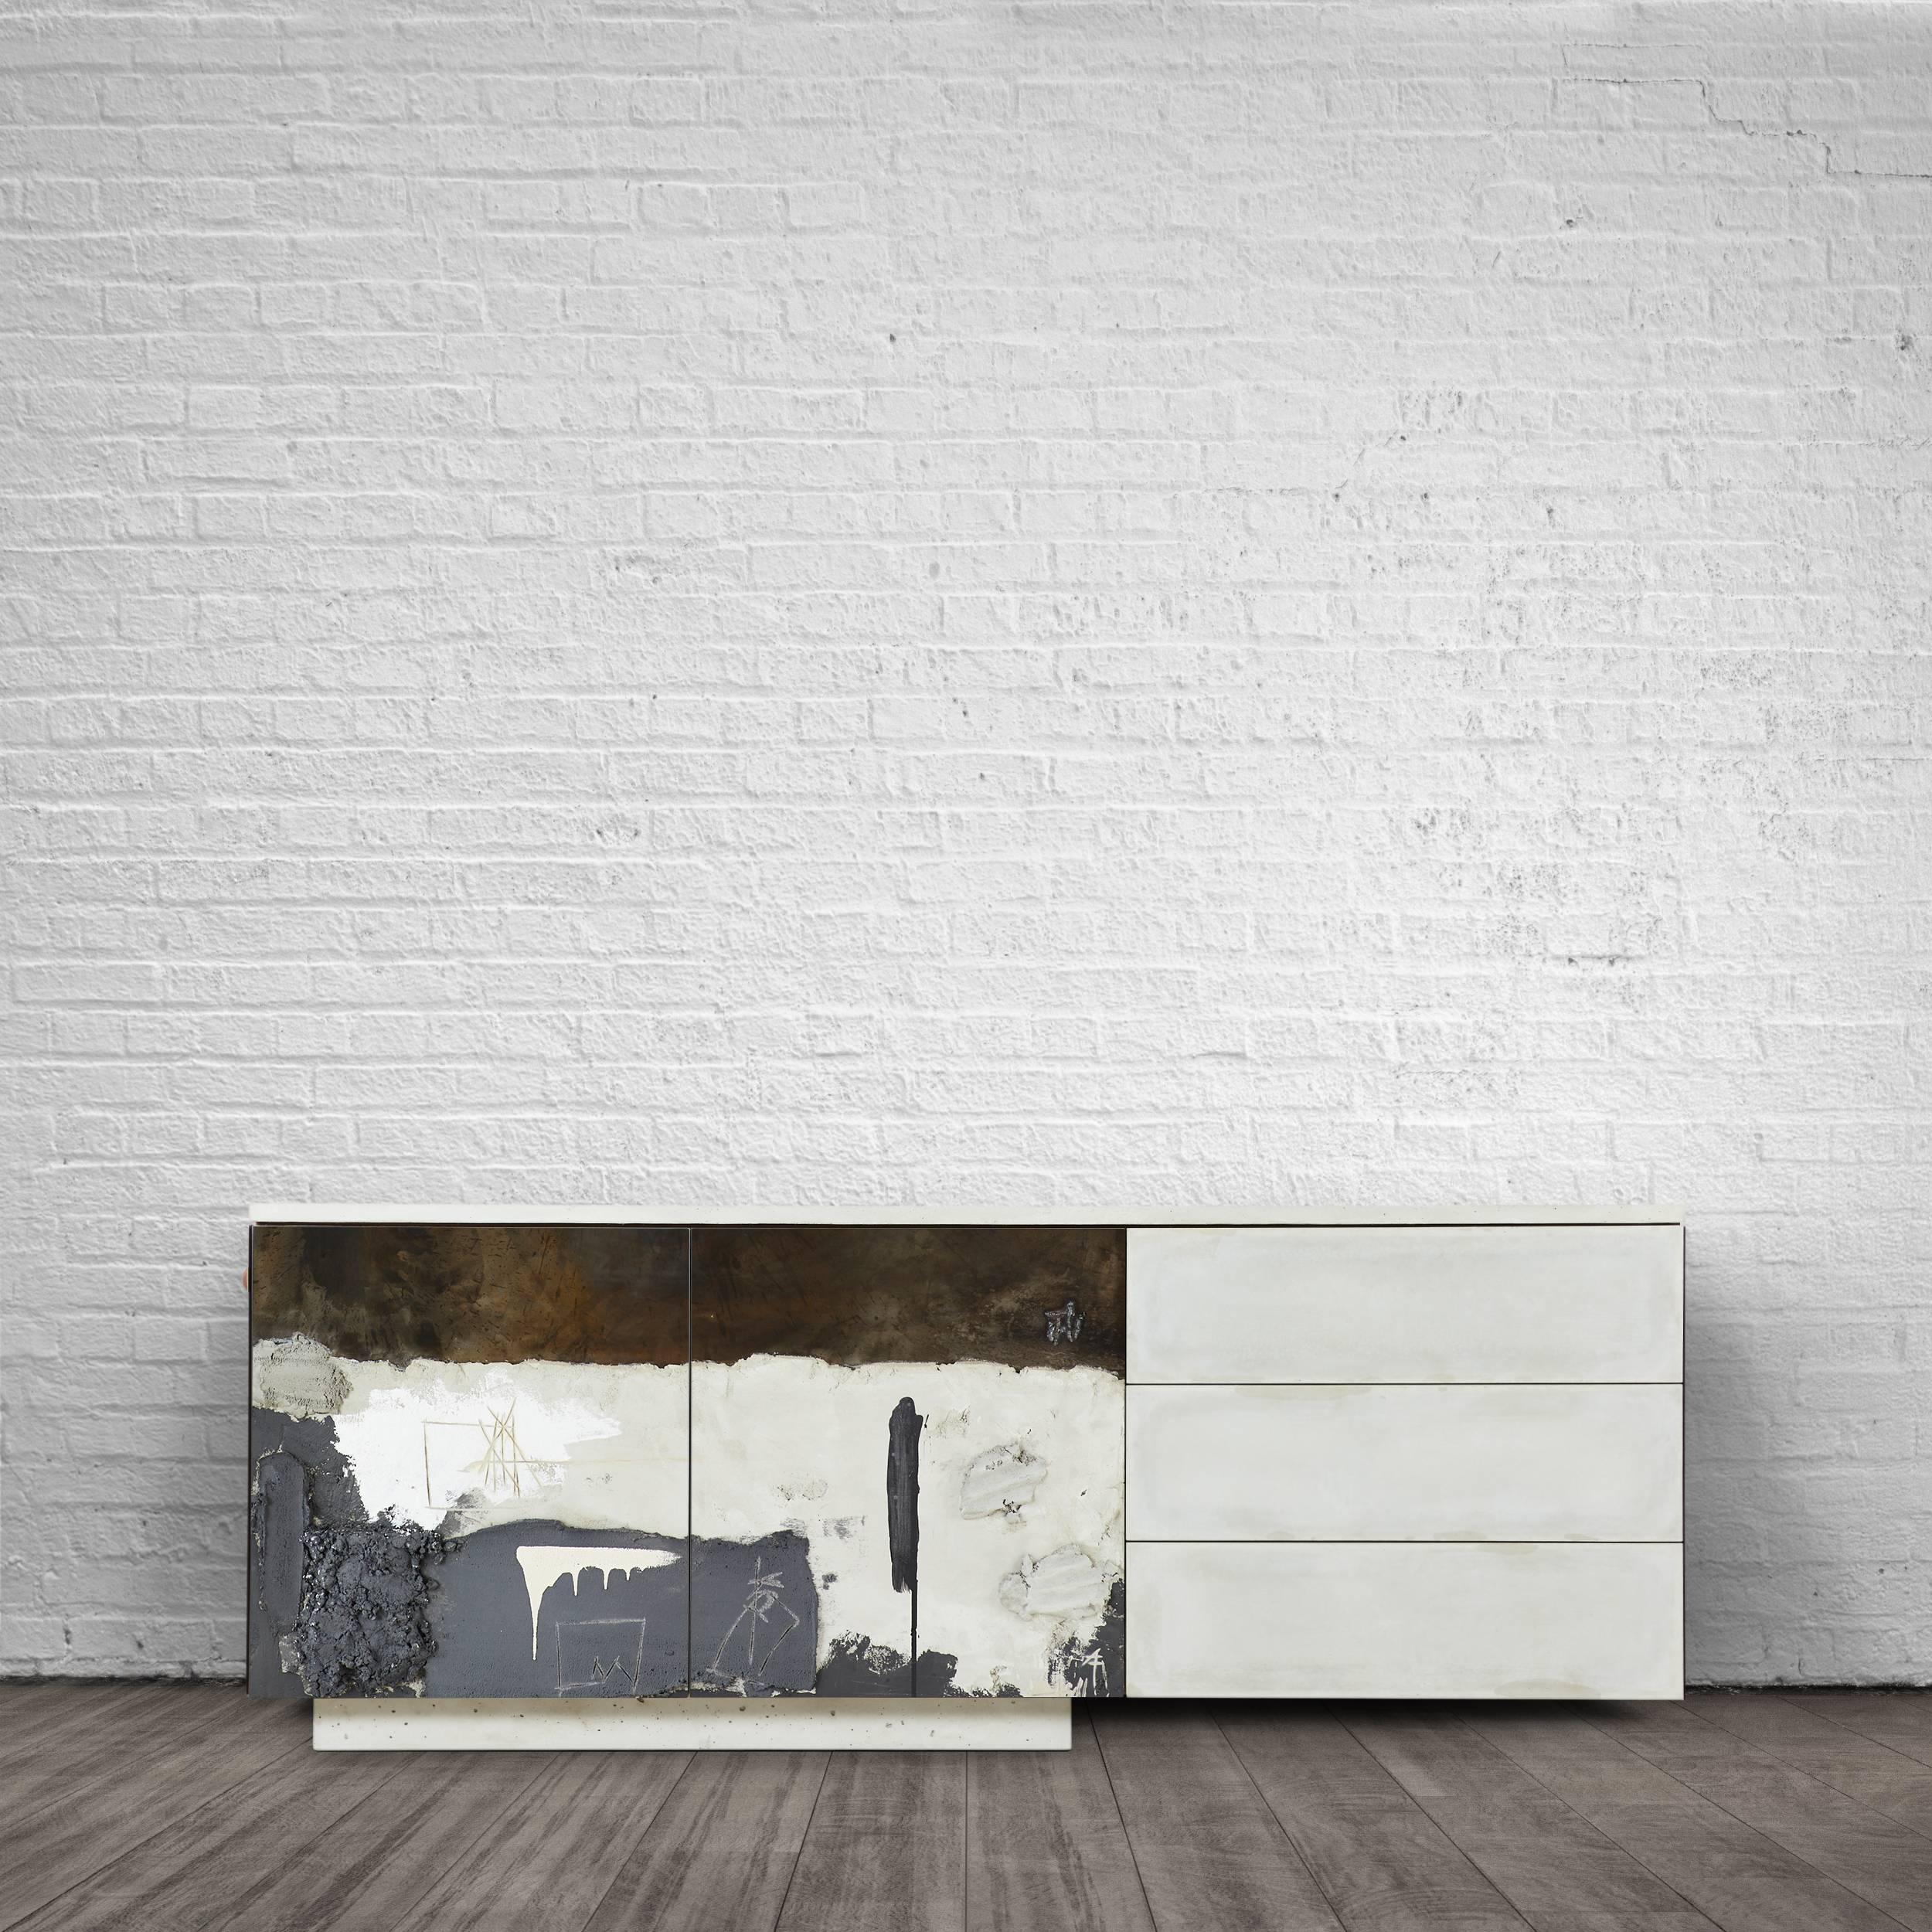 This credenza is a riff on the original C-210 credenza. The fascia is a mixed media application of concrete, steel and paint inspired by Stefan Rurak's art 